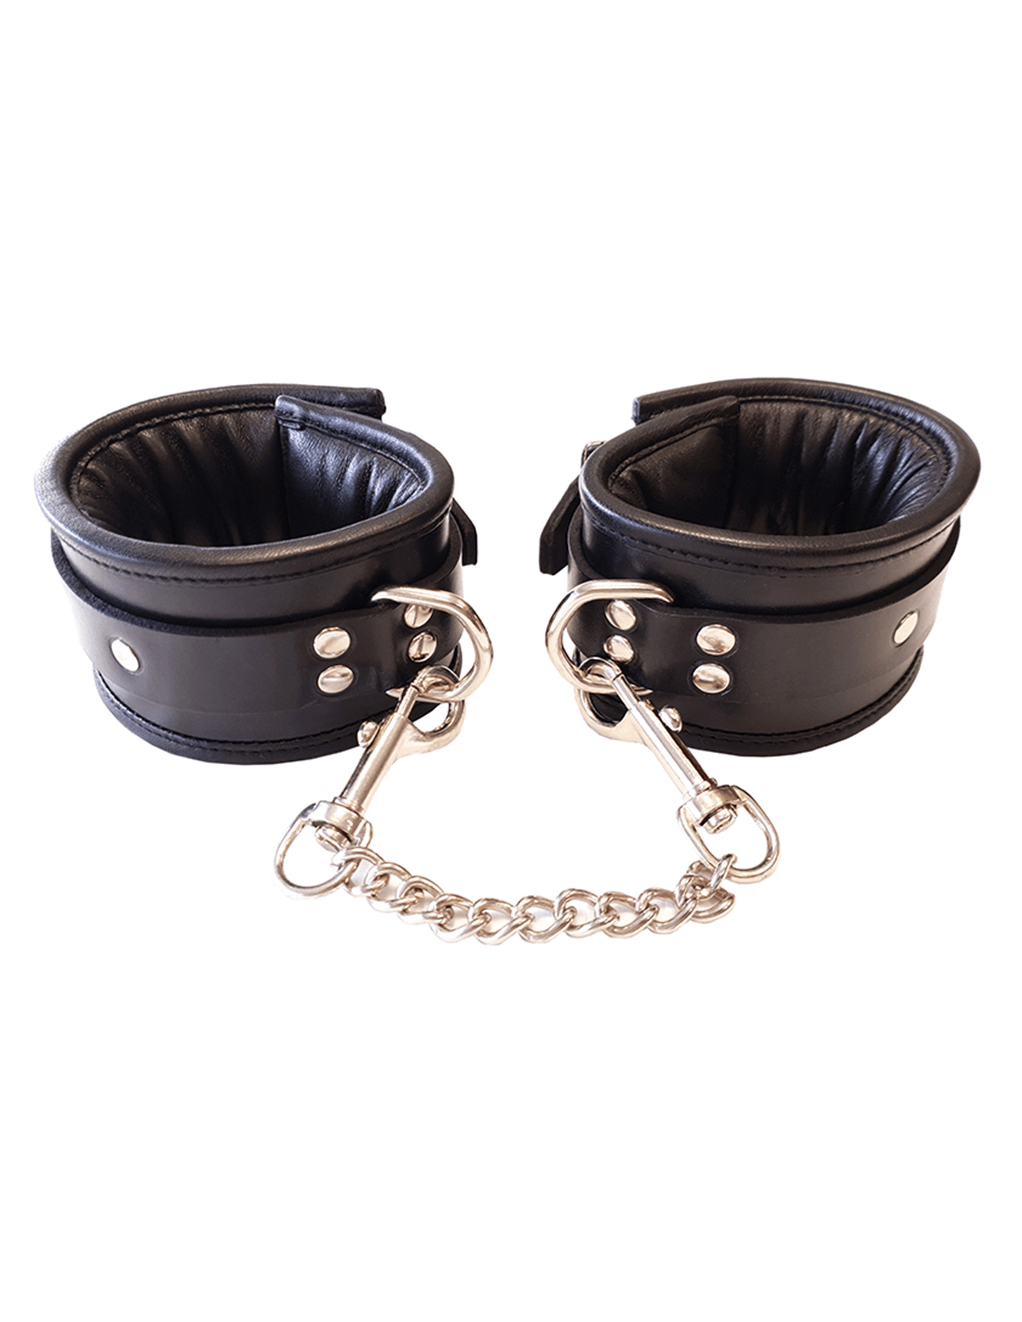 Rouge Padded Leather Ankle Cuffs - Black - Main